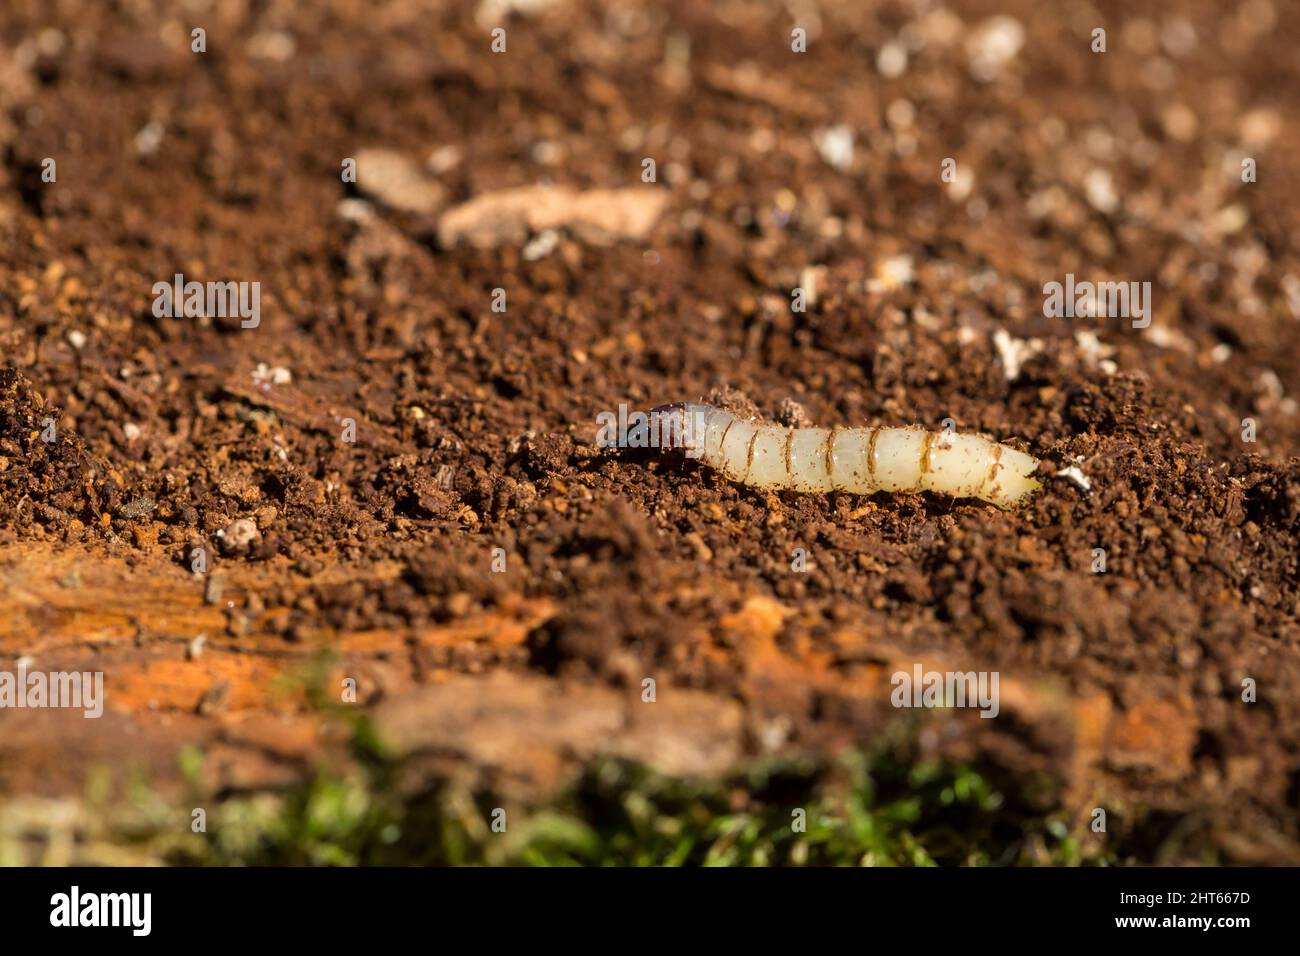 Awl-fly larva on rotten wood (Xylophagus sp) Stock Photo